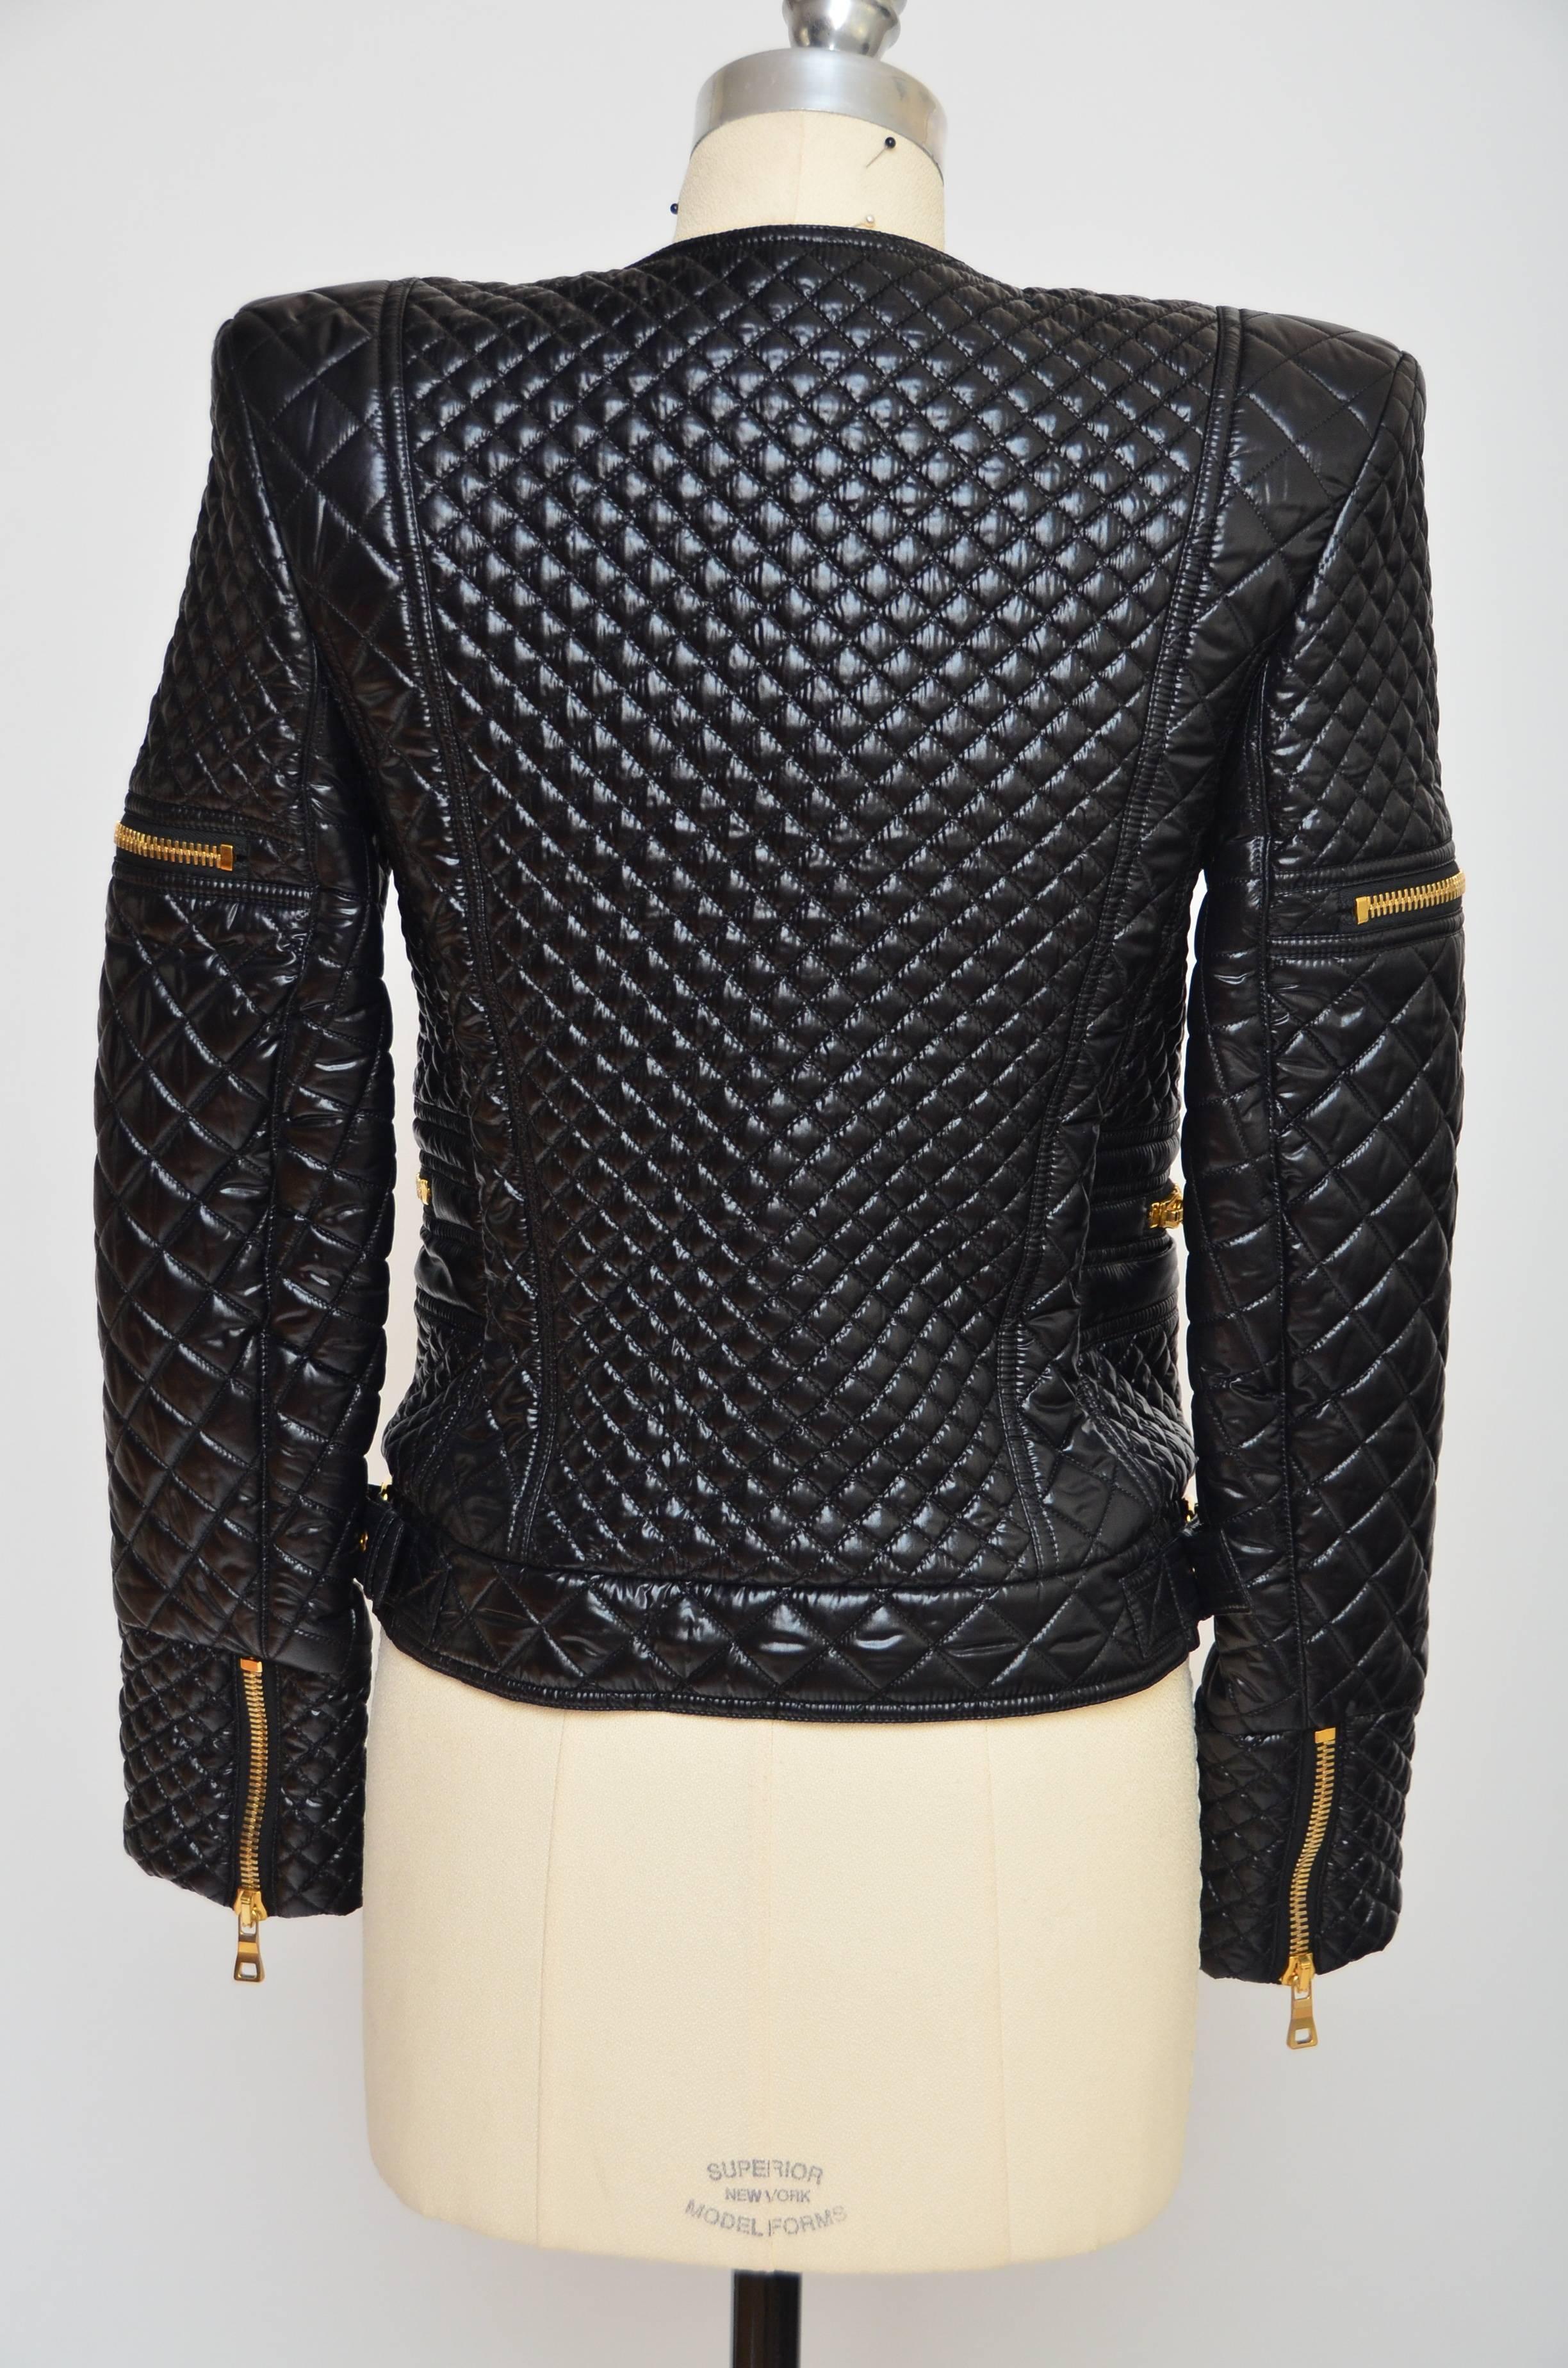 Balmain techno quilted black jacket .Similar jacket seen on Beyonce and Nicki Minaj.
Excellent like new condition.
Made in France.
Size 40.Run small...i would recommend this jacket to be size 4 us size.
Zipper closure in the front with an option to